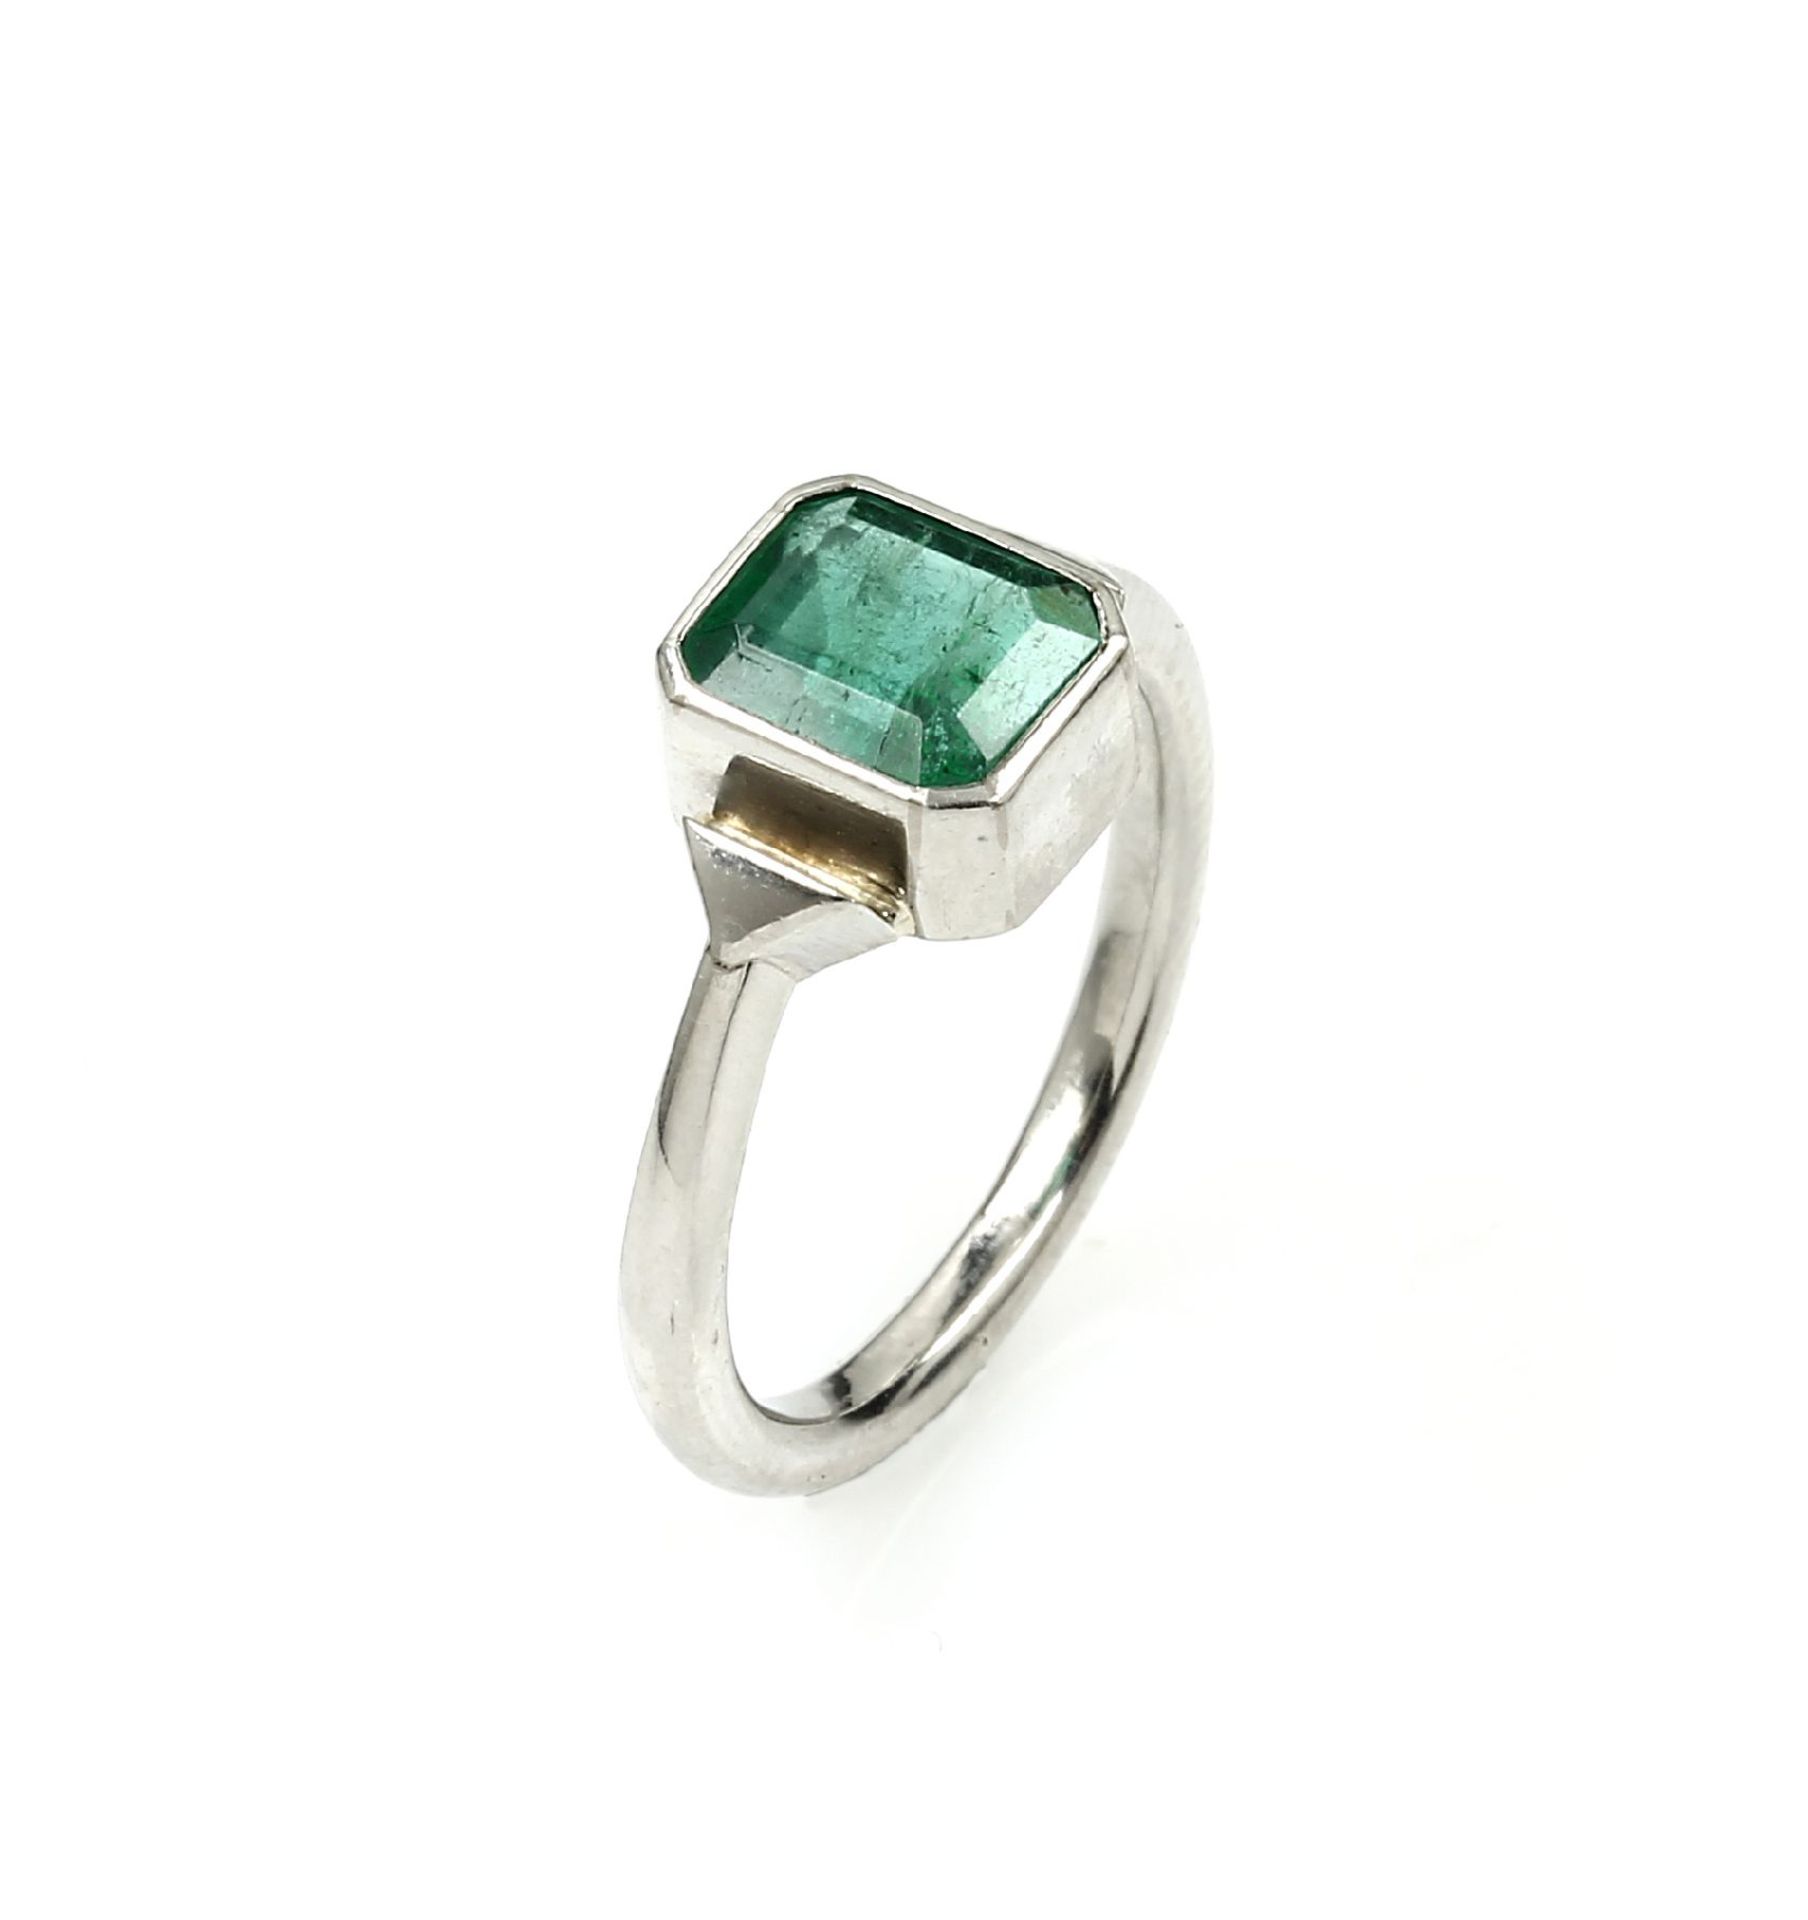 Ring with emerald , platinum, emerald cut emerald approx. 1.50 ct, ringsize 56, total approx. 6.8